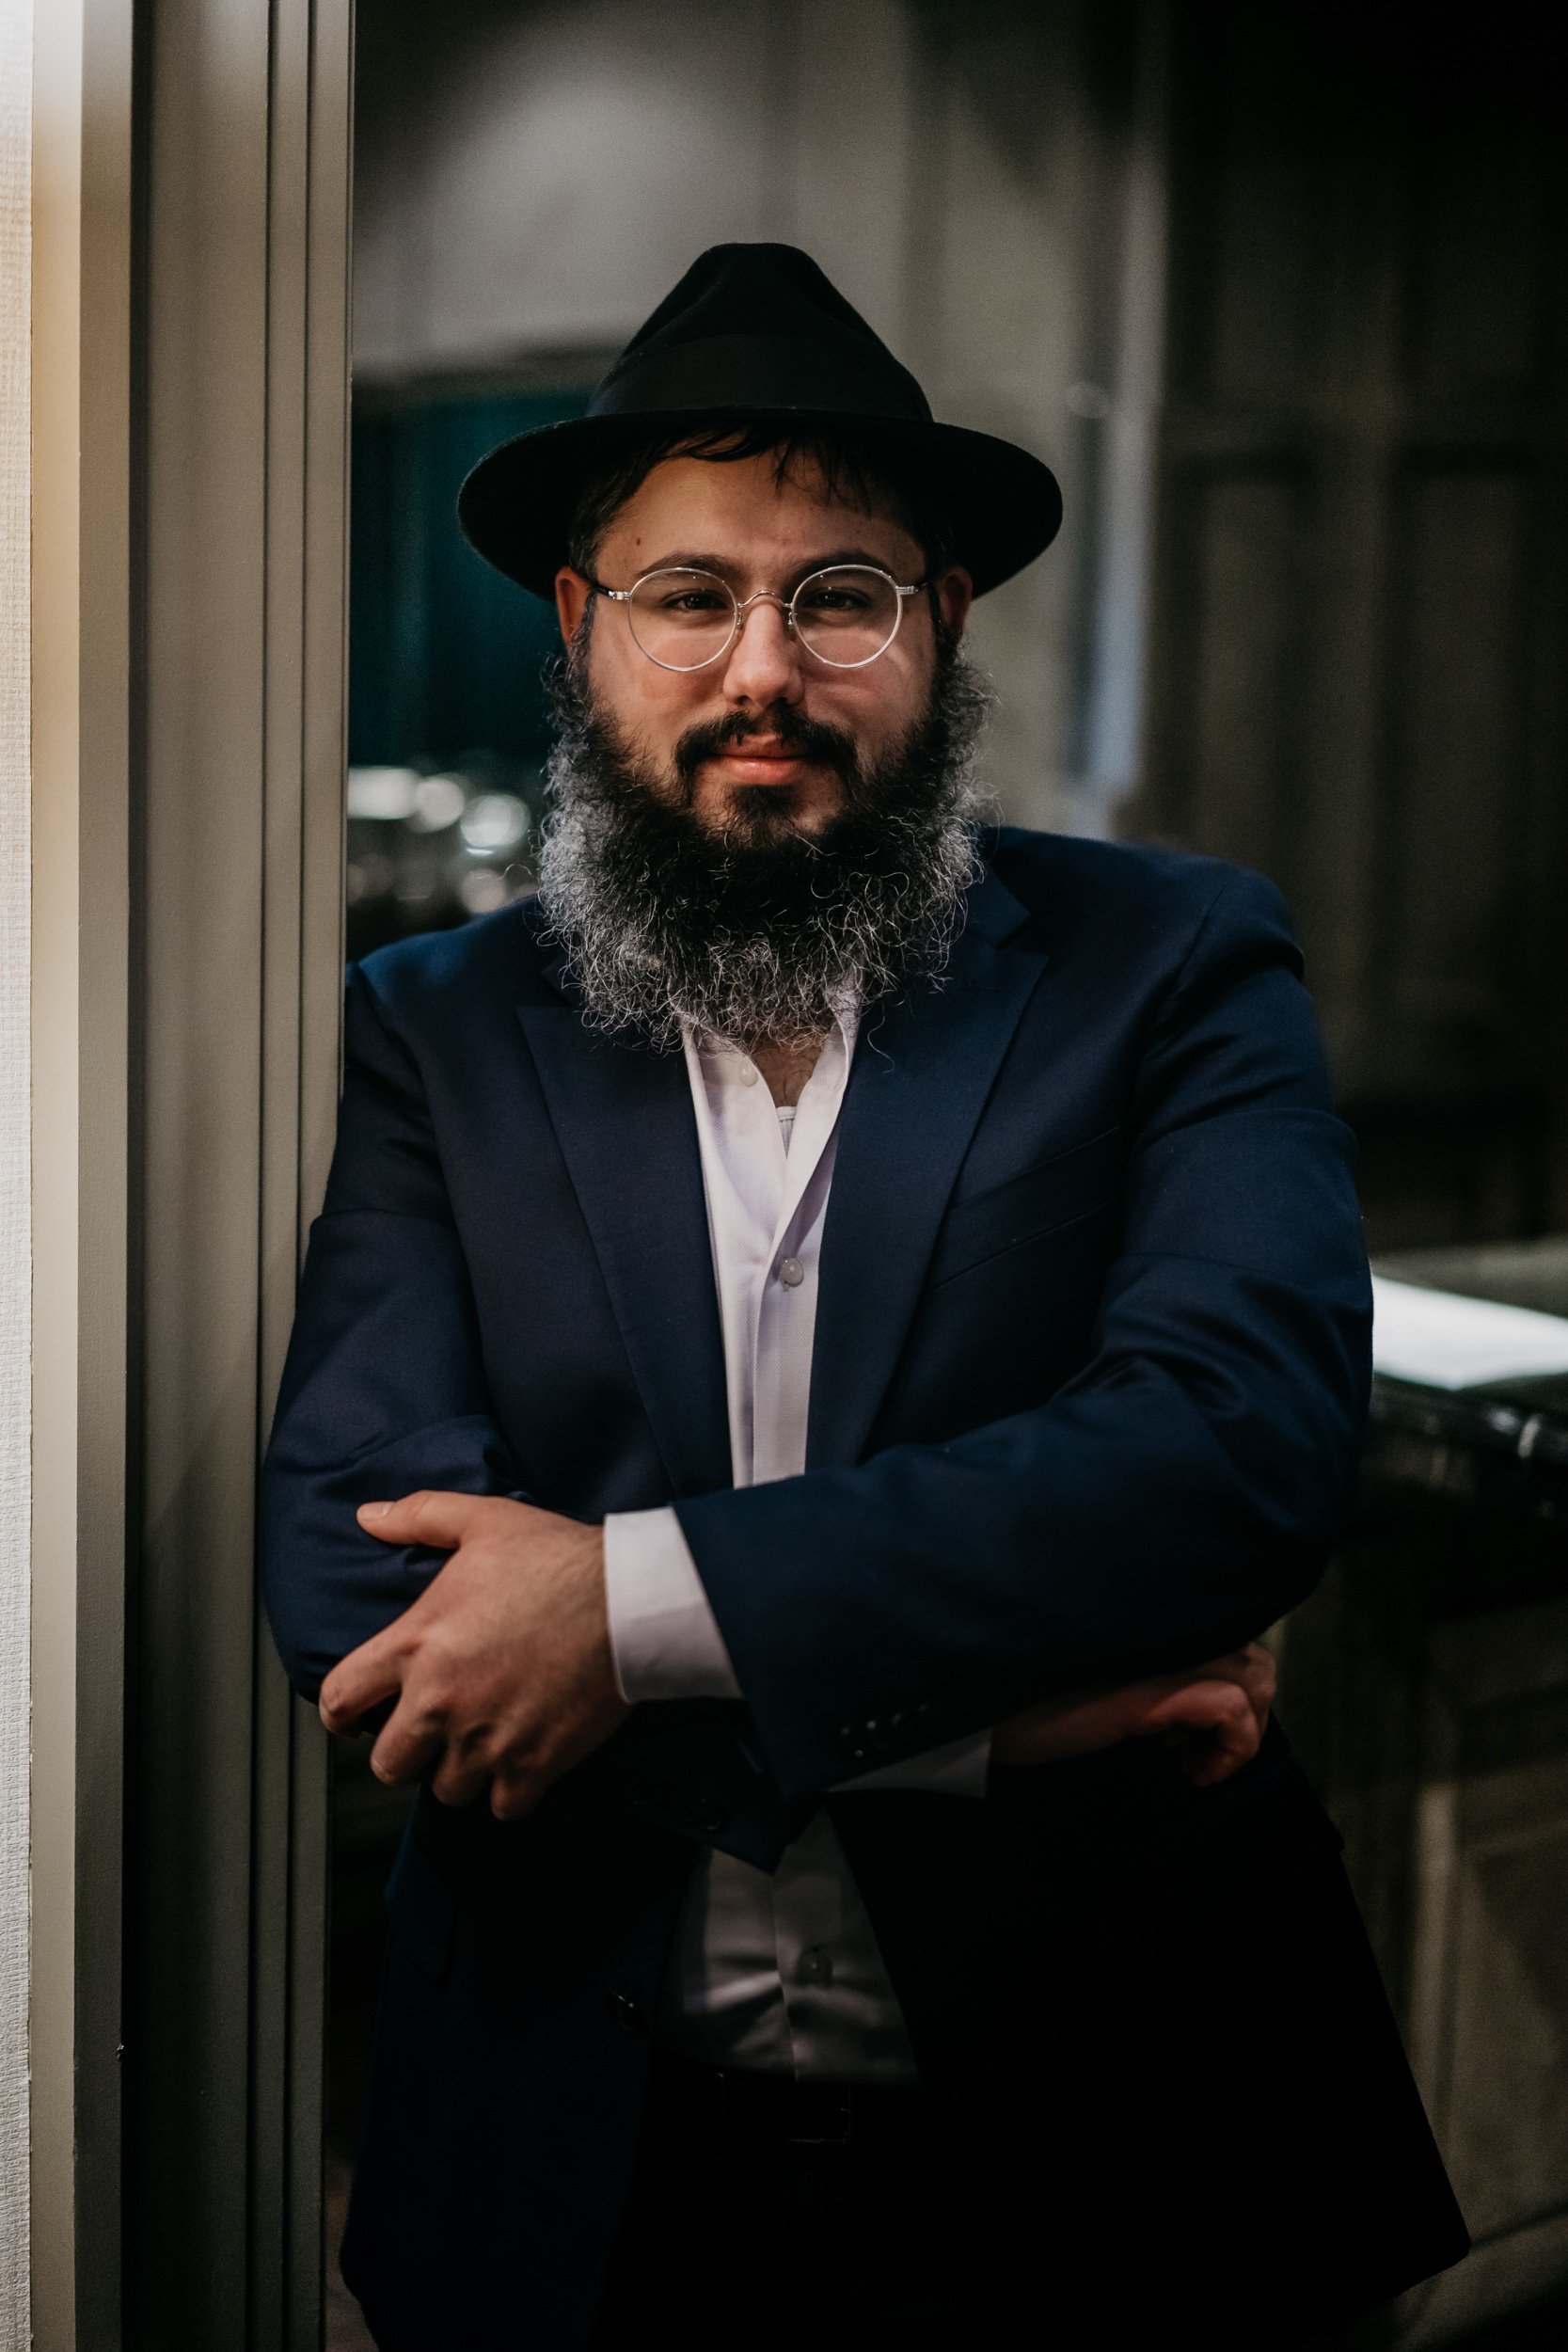  Rabbi Mendy Benhiyoun, Lakeview “Safety is a big issue. I’d love to see communities feeling safer, elderly and families feeling like they can safely stroll on Michigan Ave” 